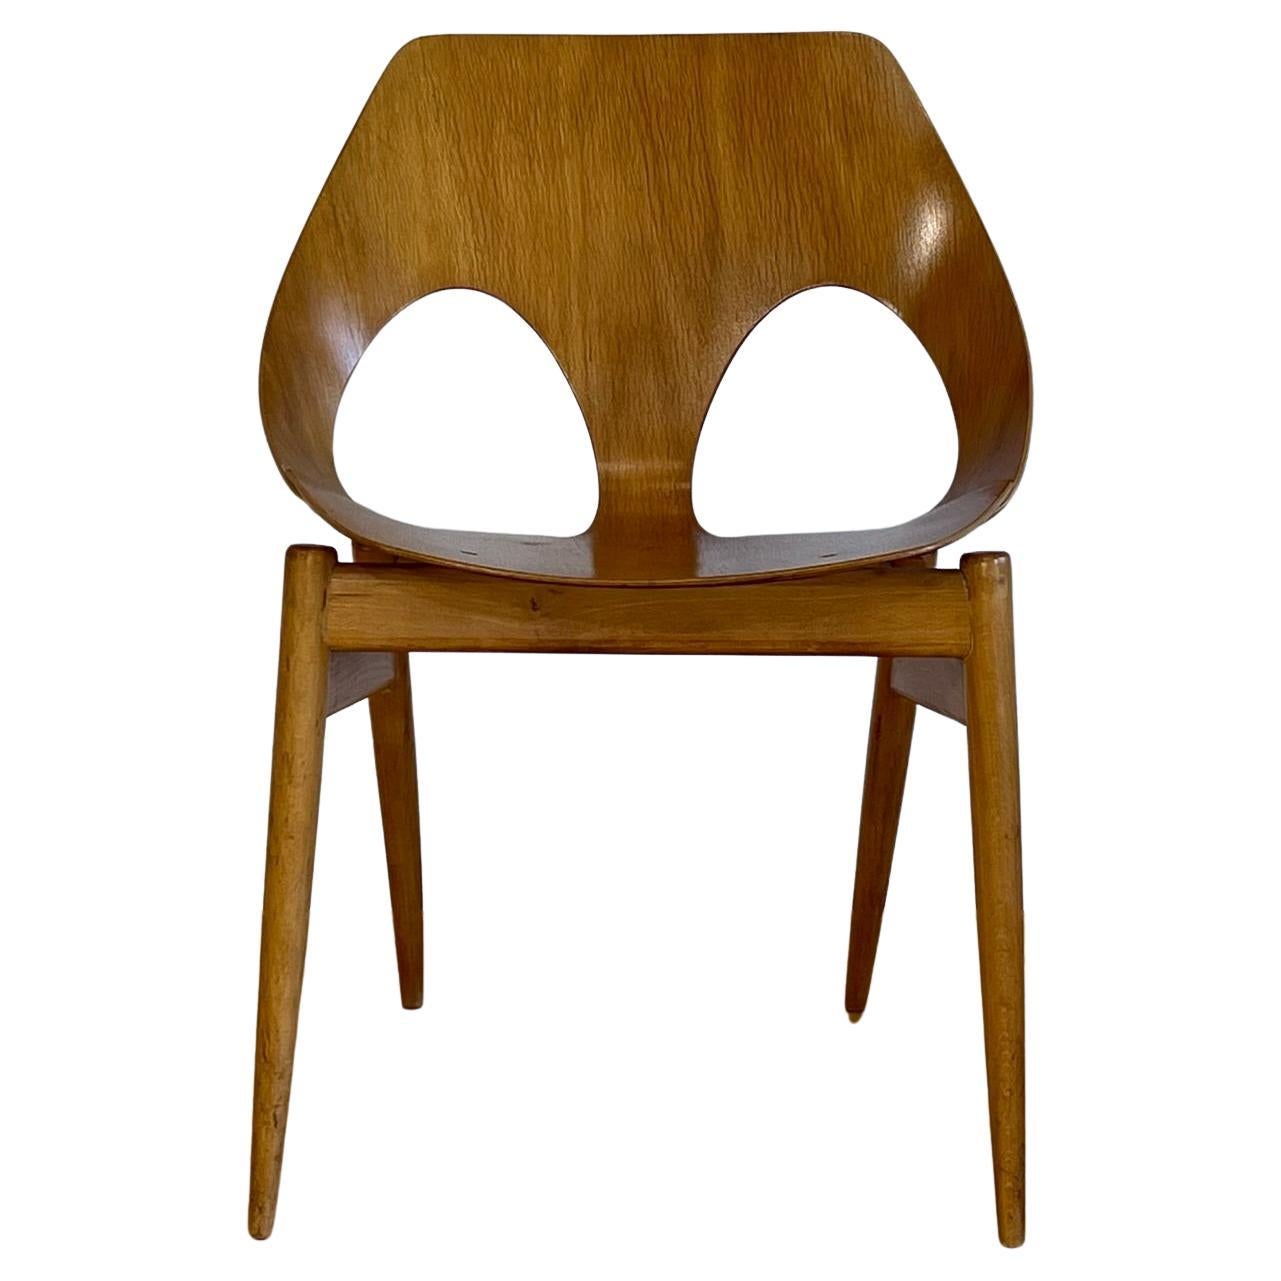 Mid-Century Danish "Jason" Chair in Beech by Carl Jacobs for Kandya, c. 1950 For Sale